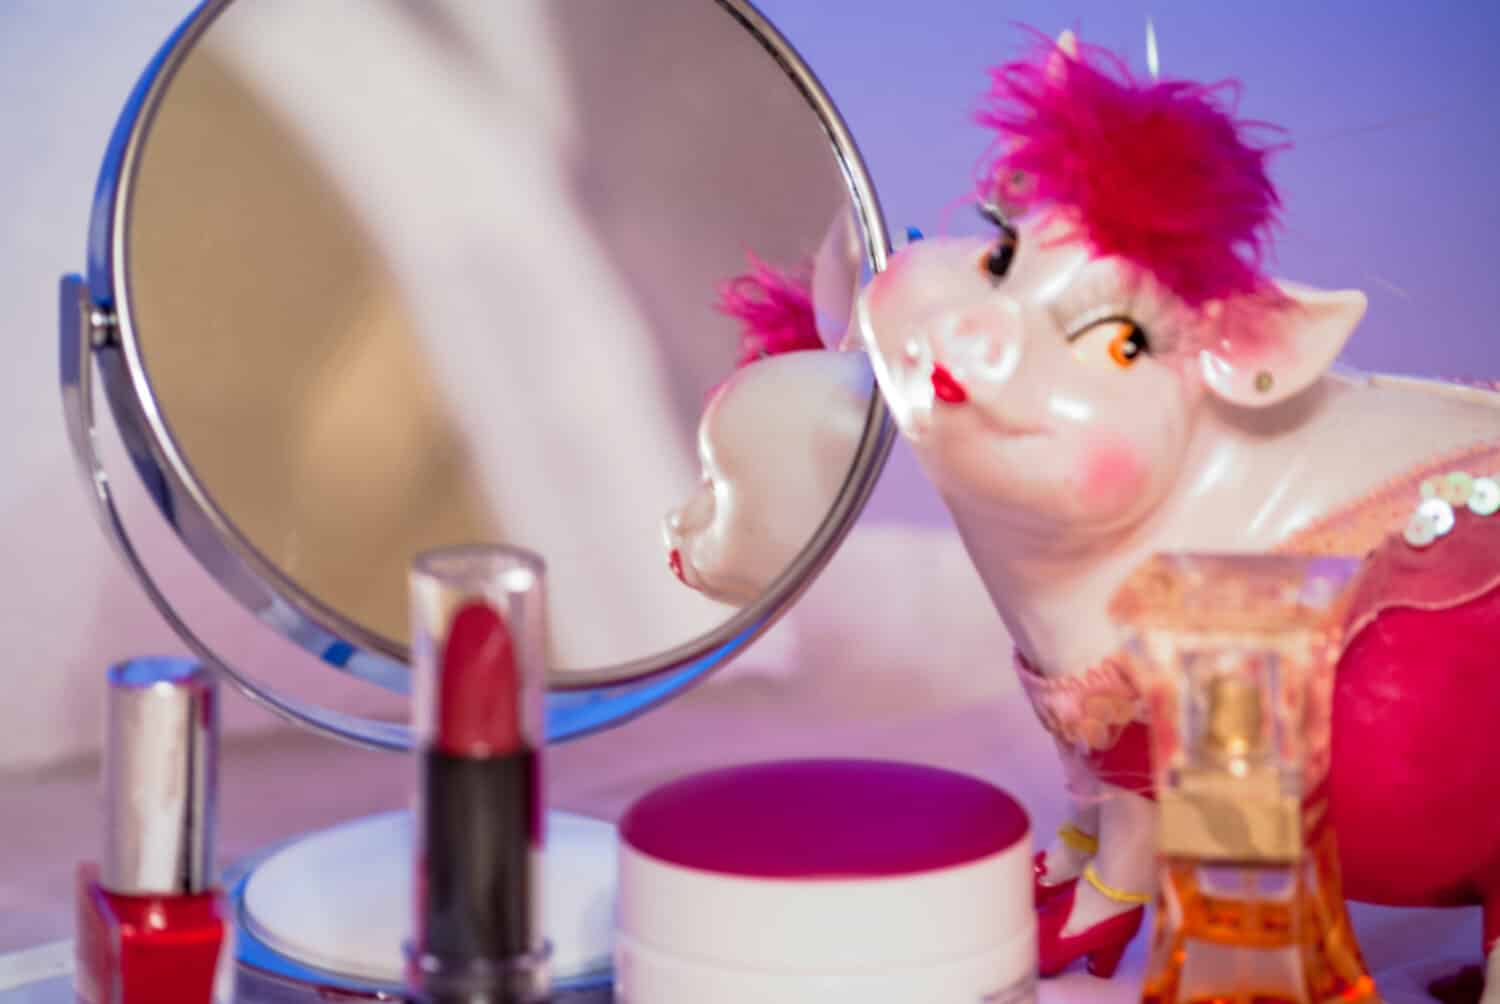 In the mirror desktop look pink piggy toy around her are all sorts of cosmetic things and lipstick red.